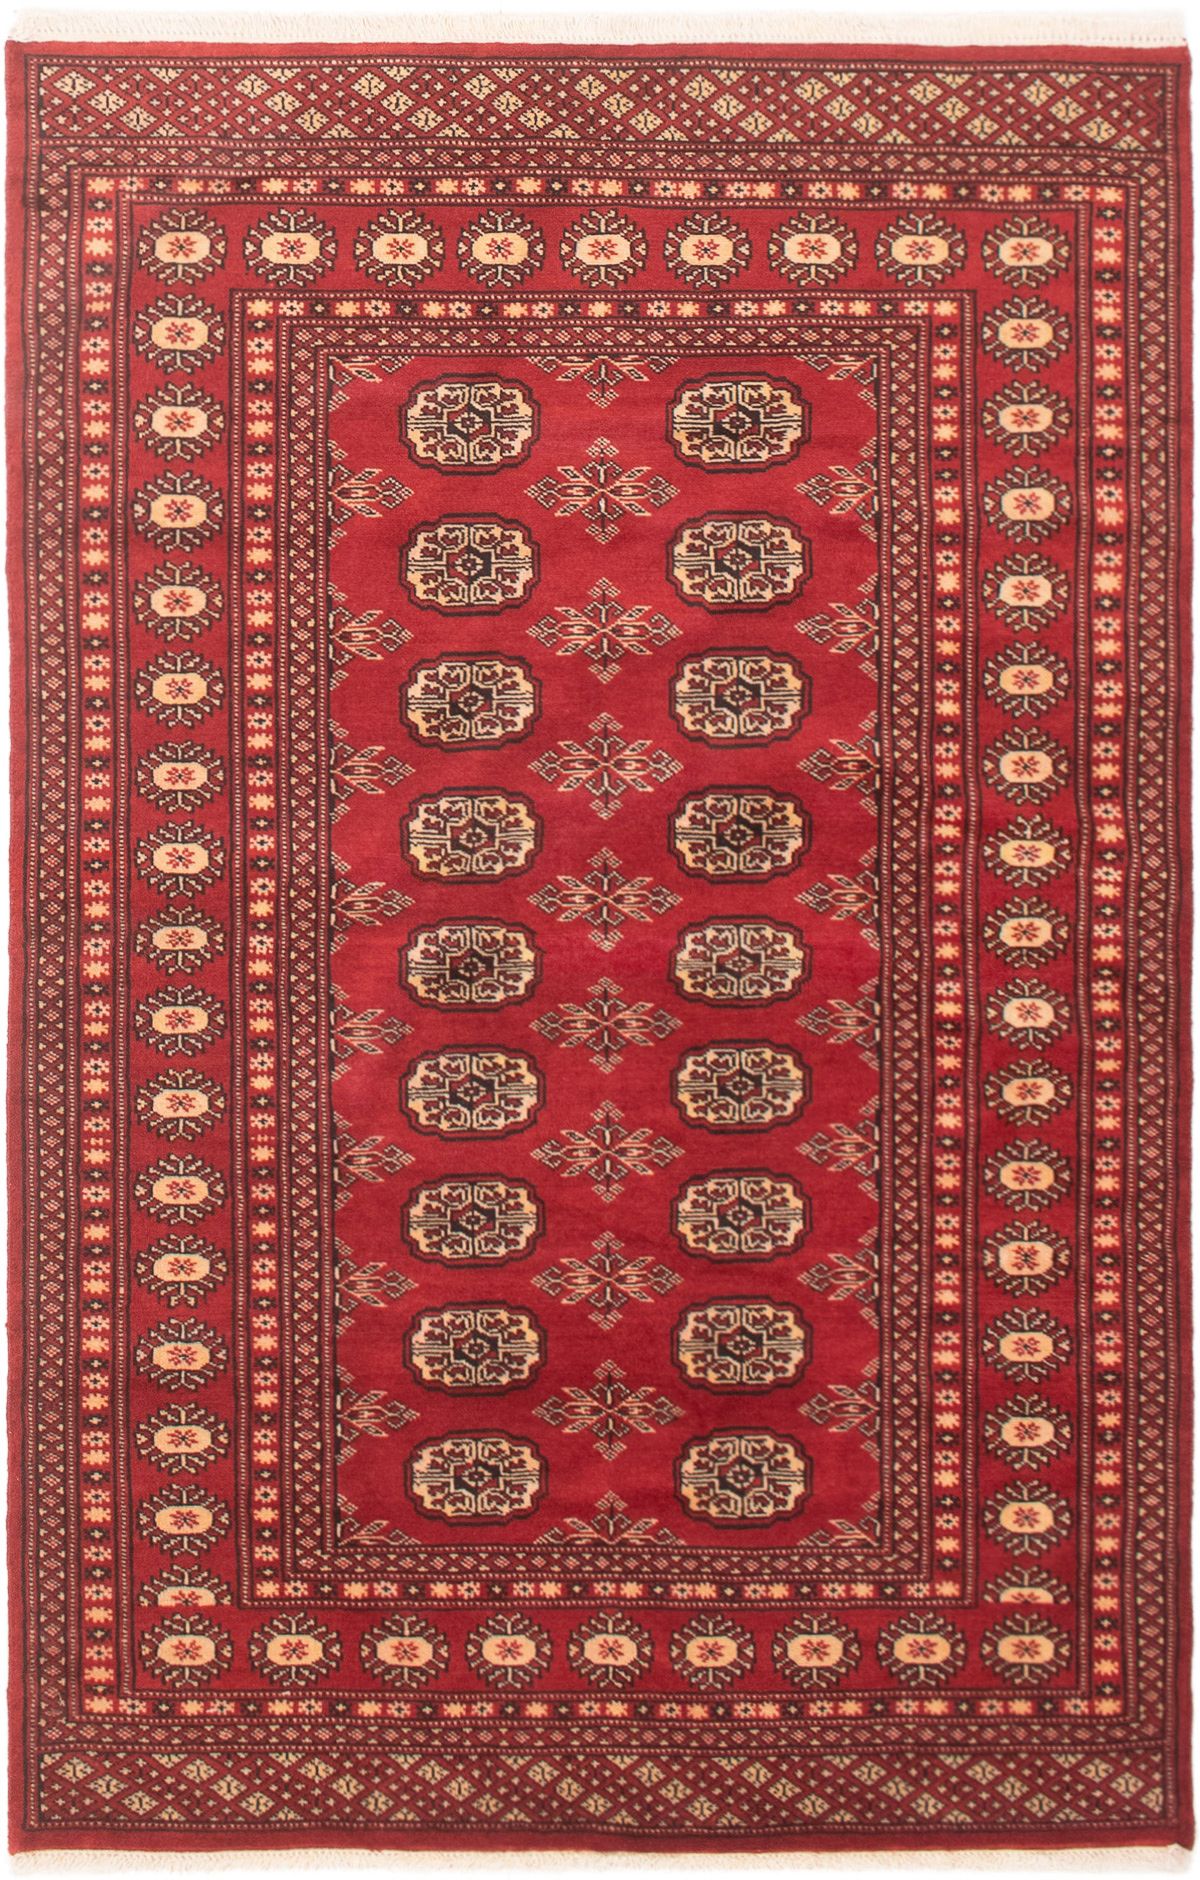 Hand-knotted Finest Peshawar Bokhara Red Wool Rug 4'0" x 6'3" Size: 4'0" x 6'3"  